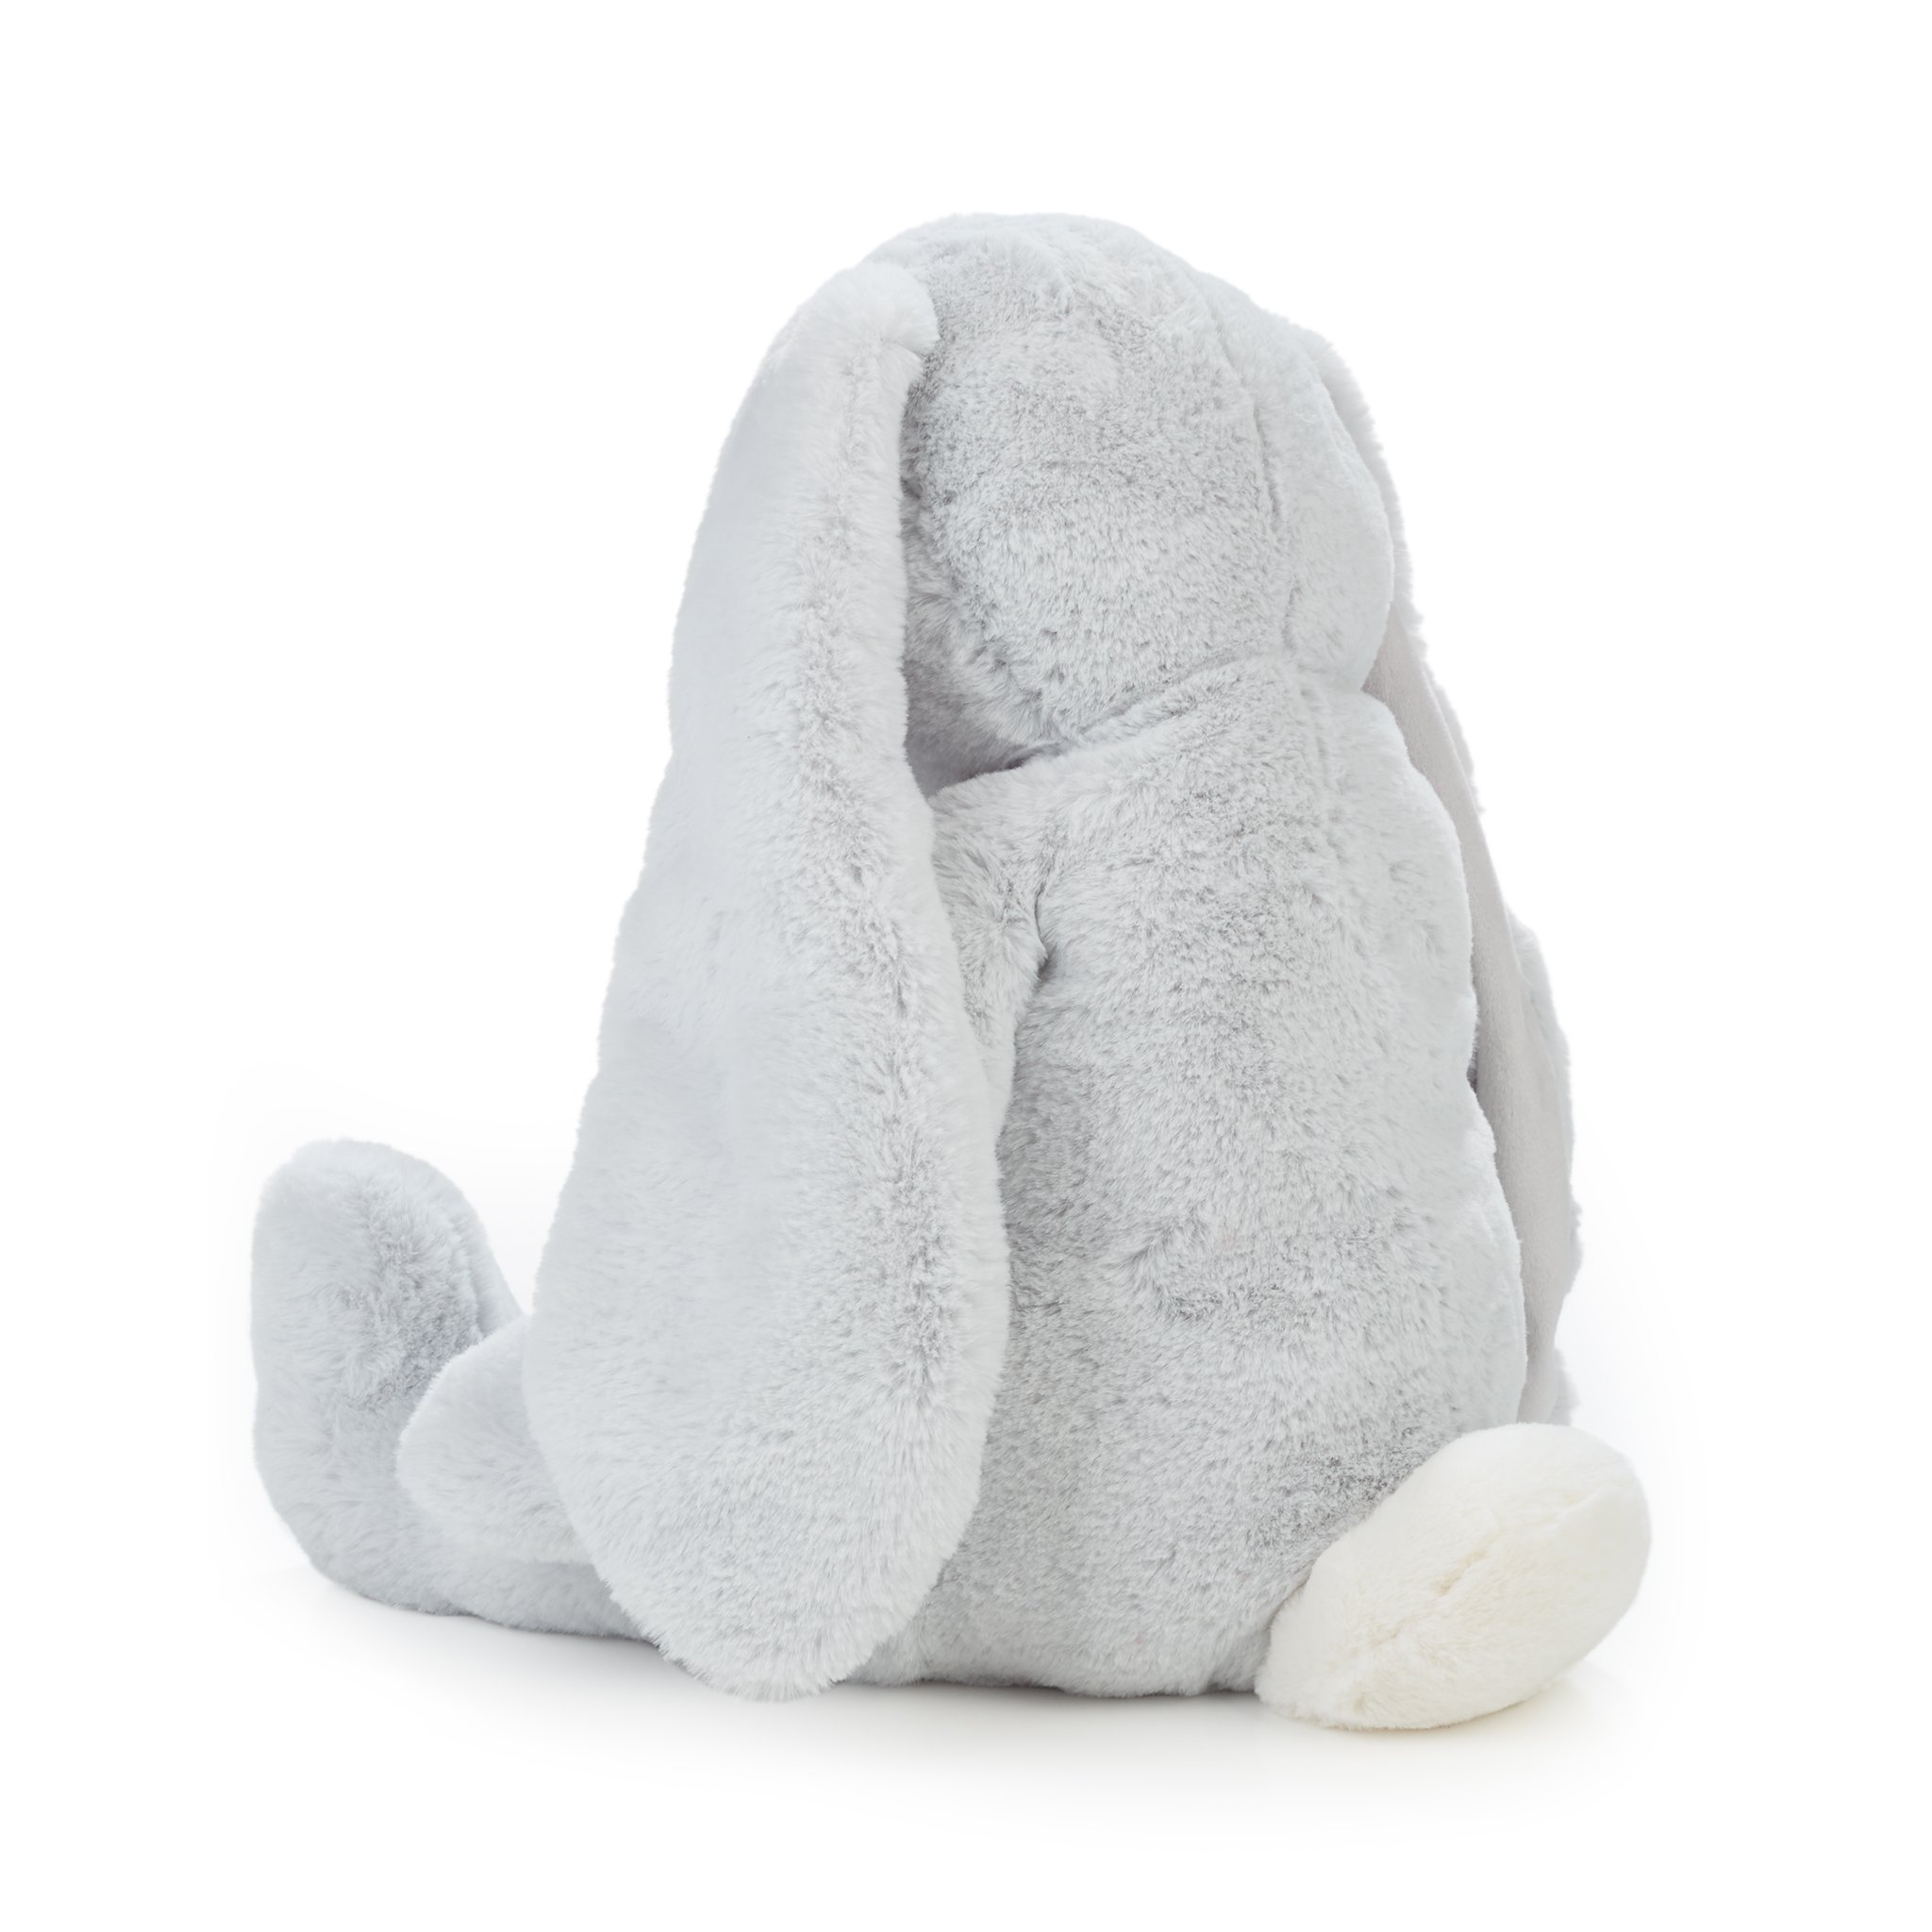 Big Nibble Bunny - Bunnies by the Bay Plush Toy